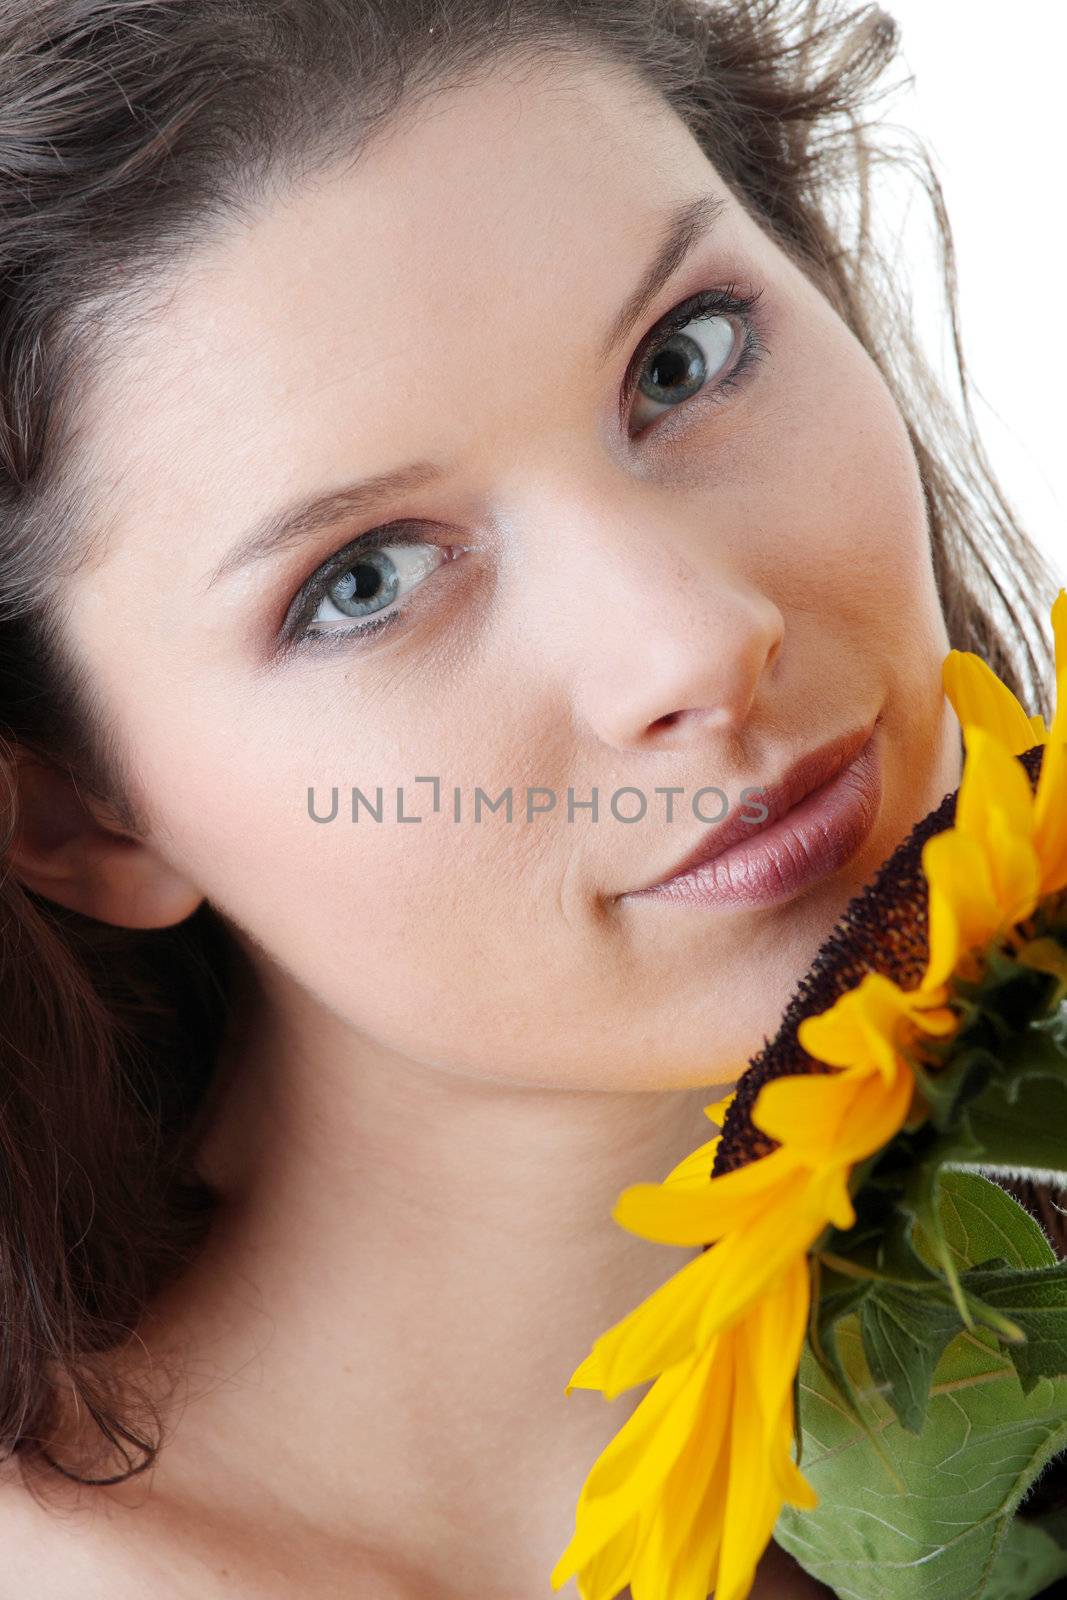 Portrait of a Beautiful girl with sunflower, studio shot over white